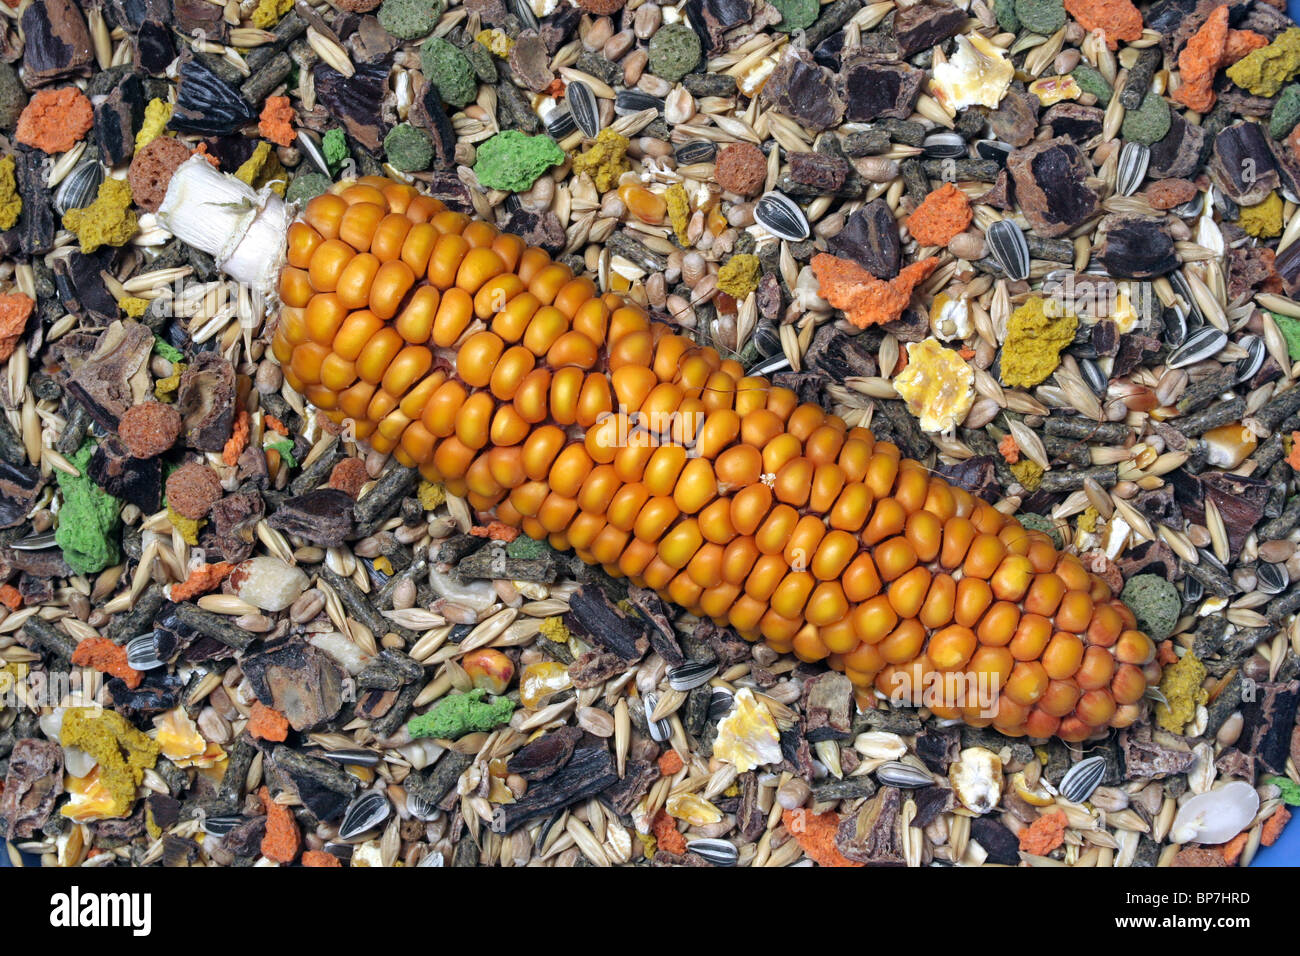 Maize, Corn (Zea mays). Cob lying on rodent feed with sunflower kernels, grain, multi-coloured pellets and maize corns. Stock Photo